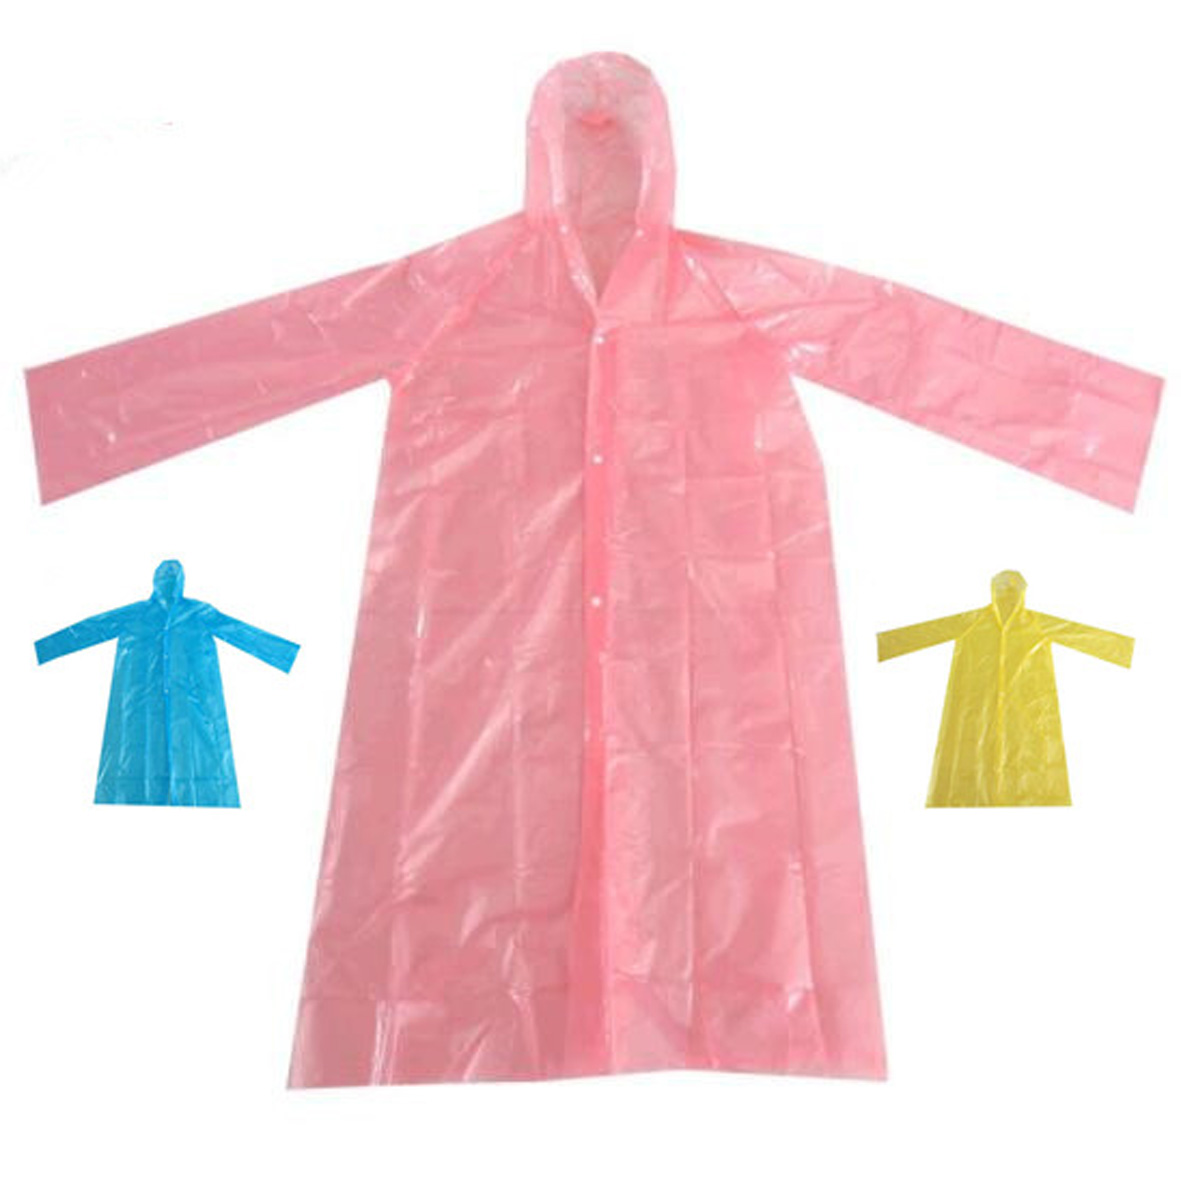 GL-ELY1133 Disposable Adult Raincoat